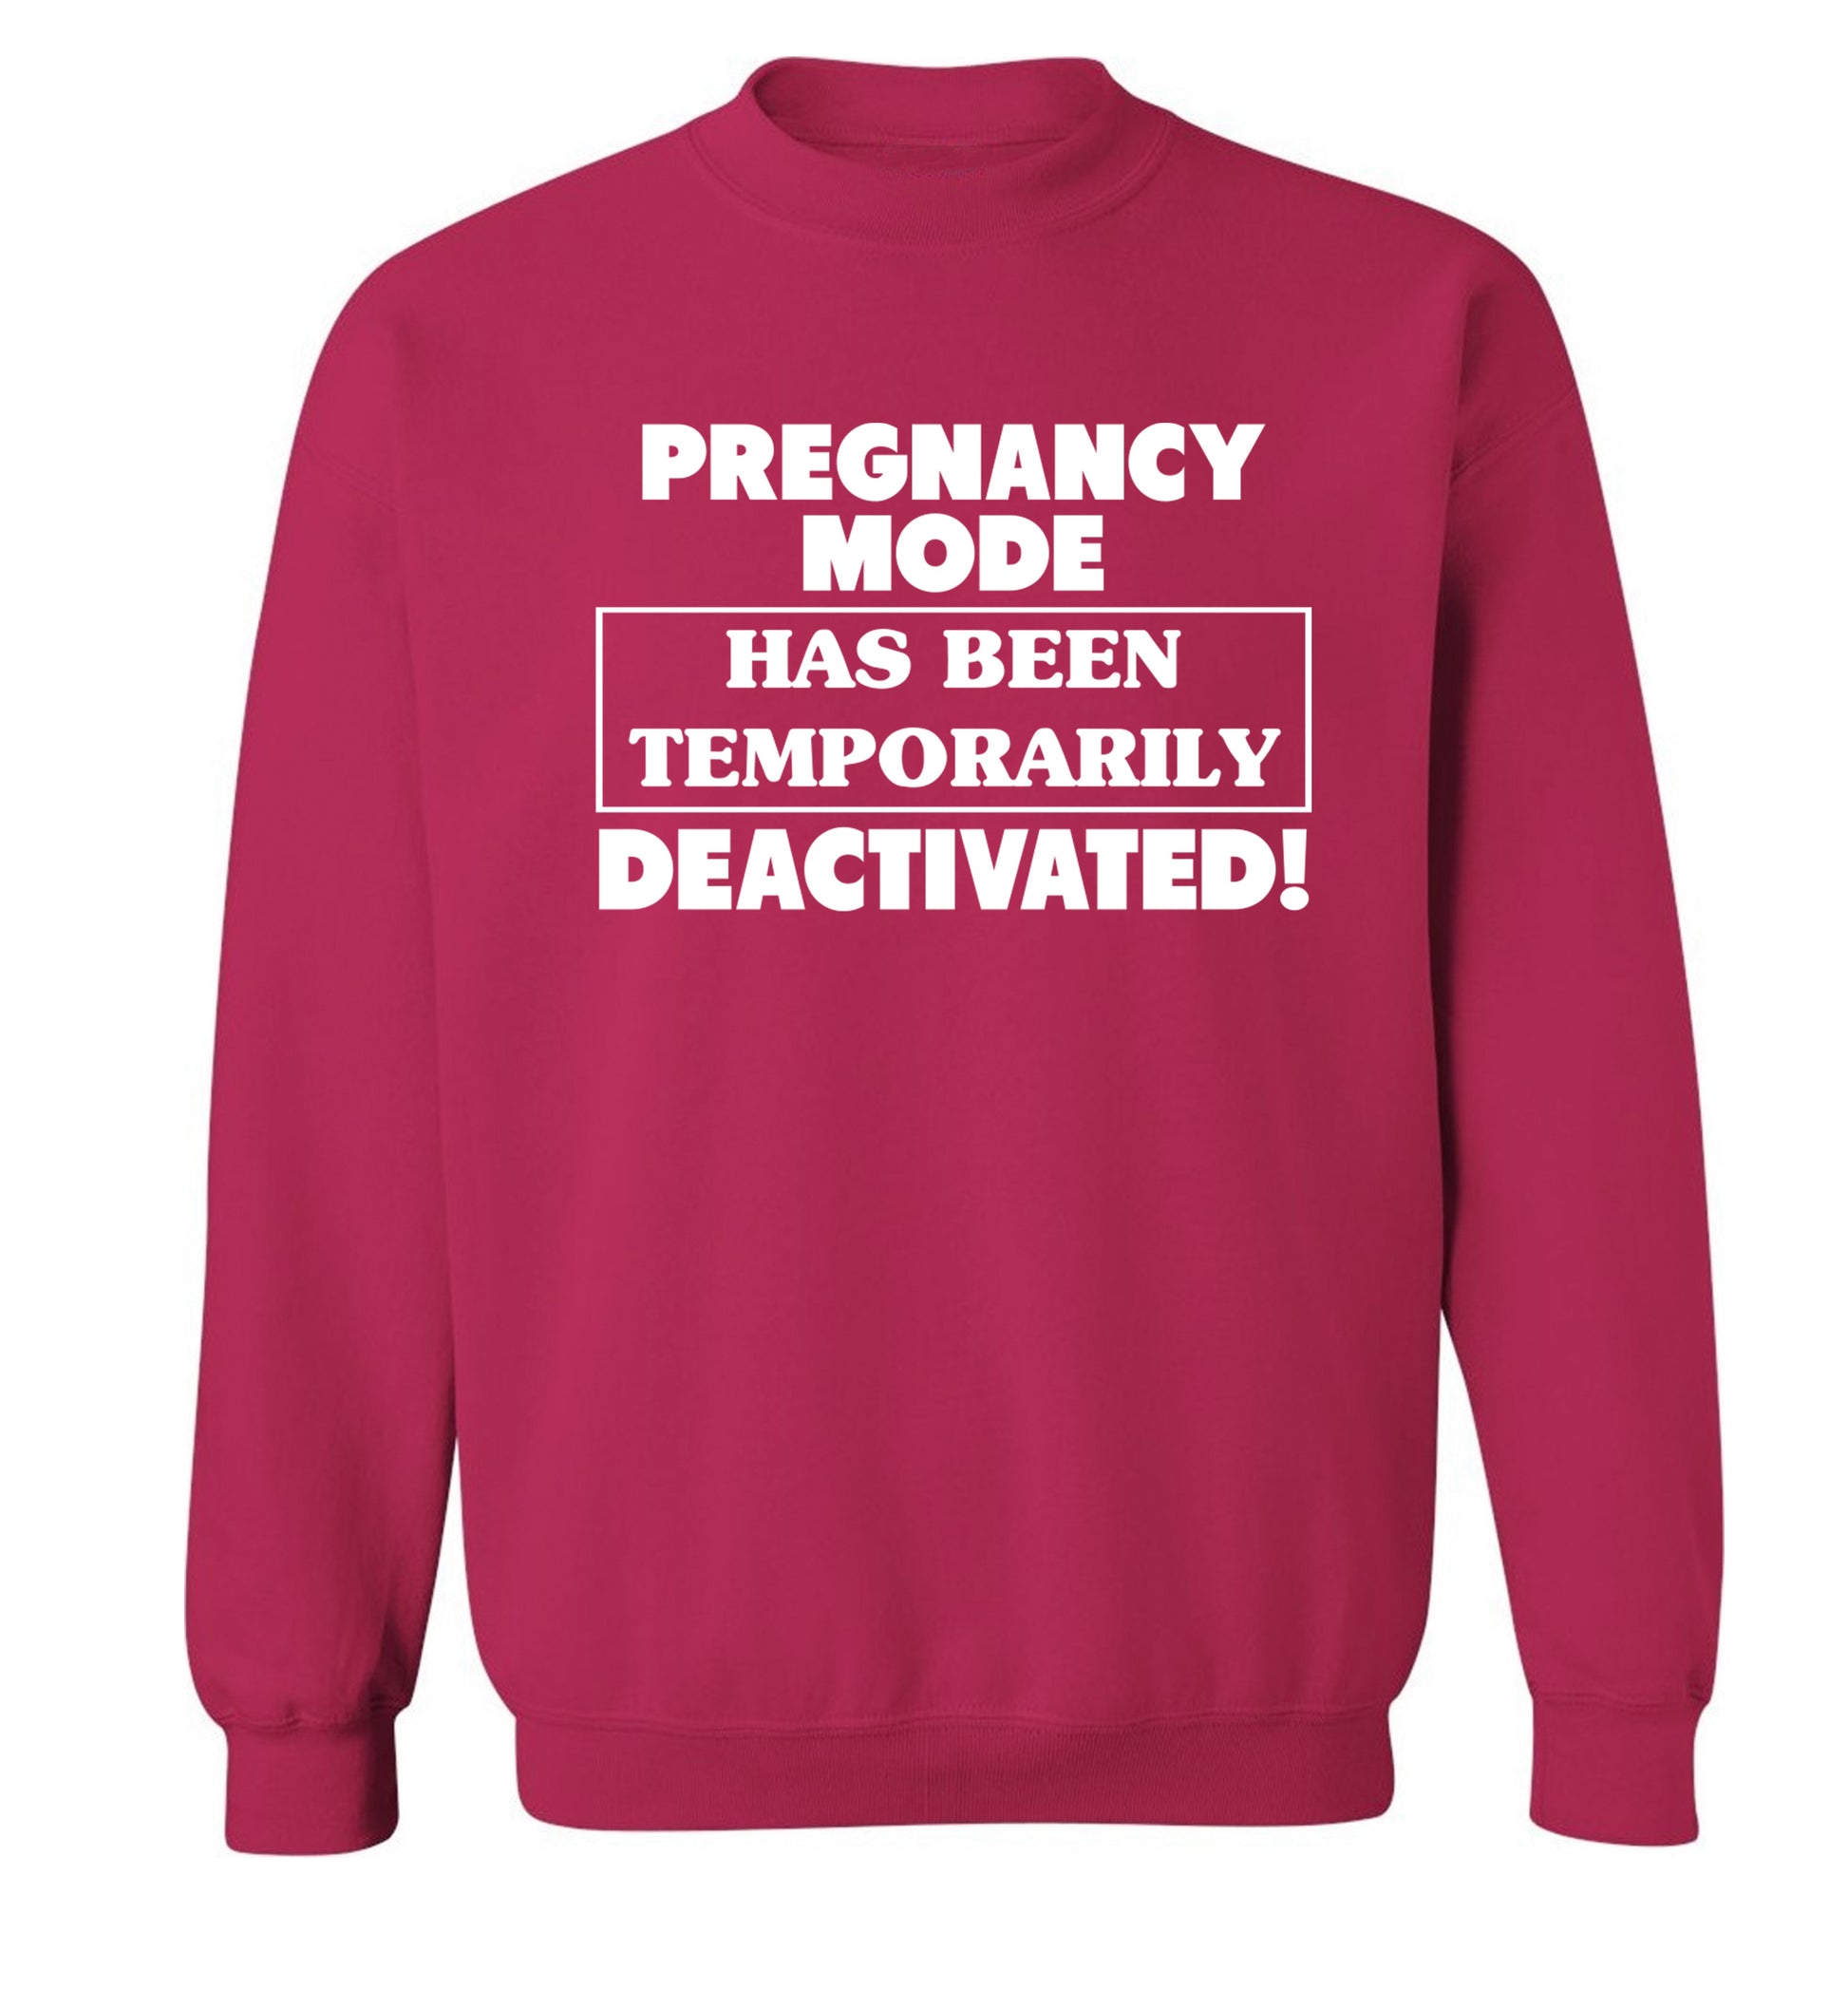 Pregnancy mode has now been temporarily deactivated Adult's unisex pink Sweater 2XL